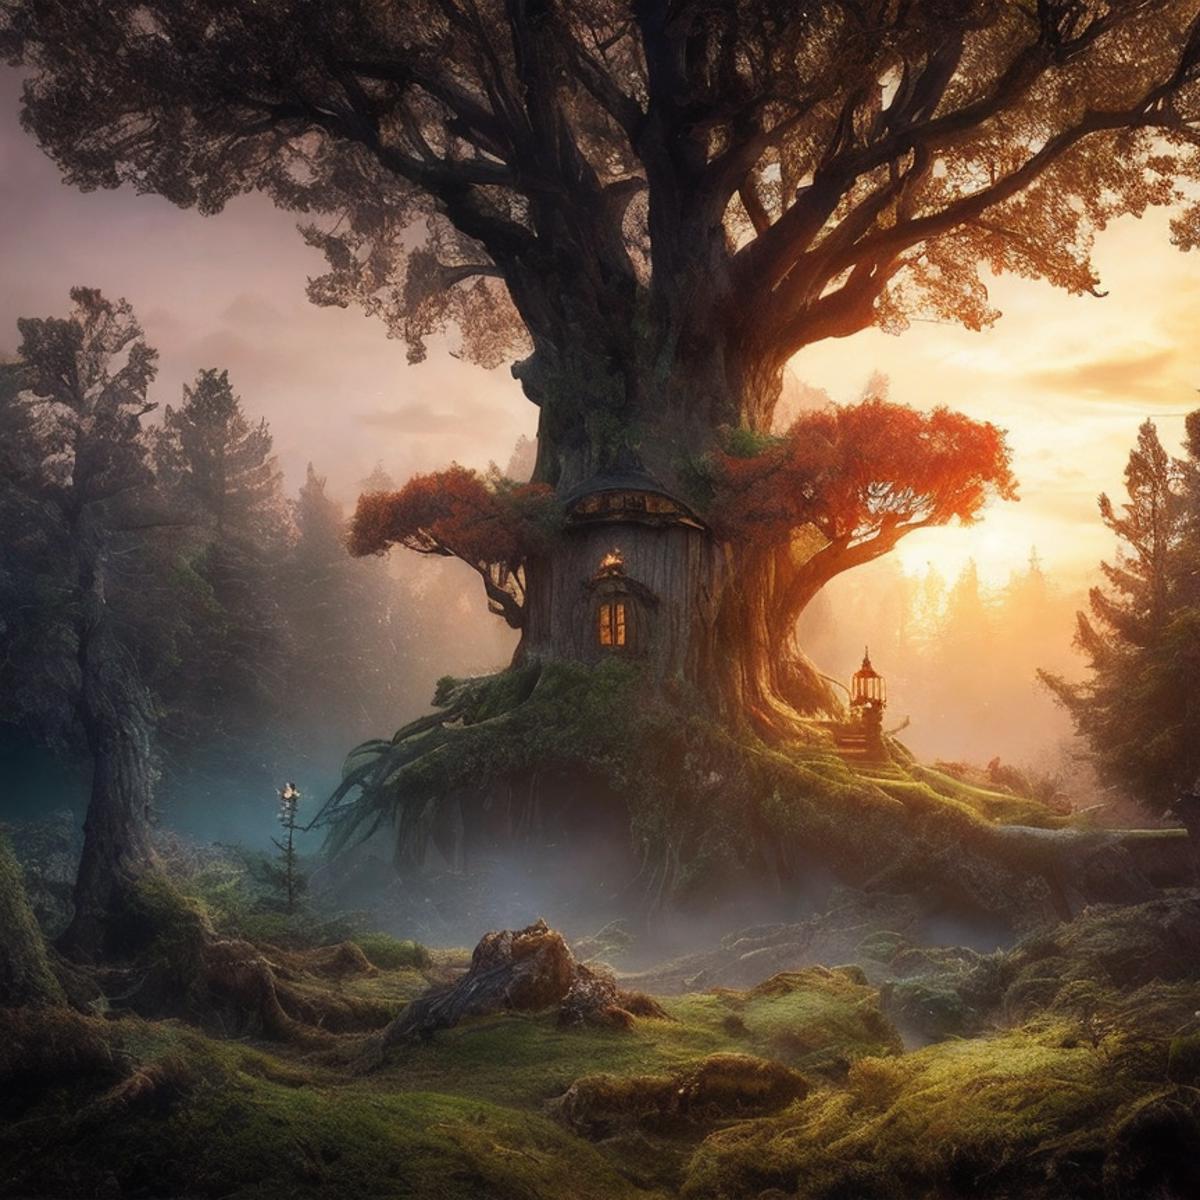 A magical forest with a large tree and a home inside it.